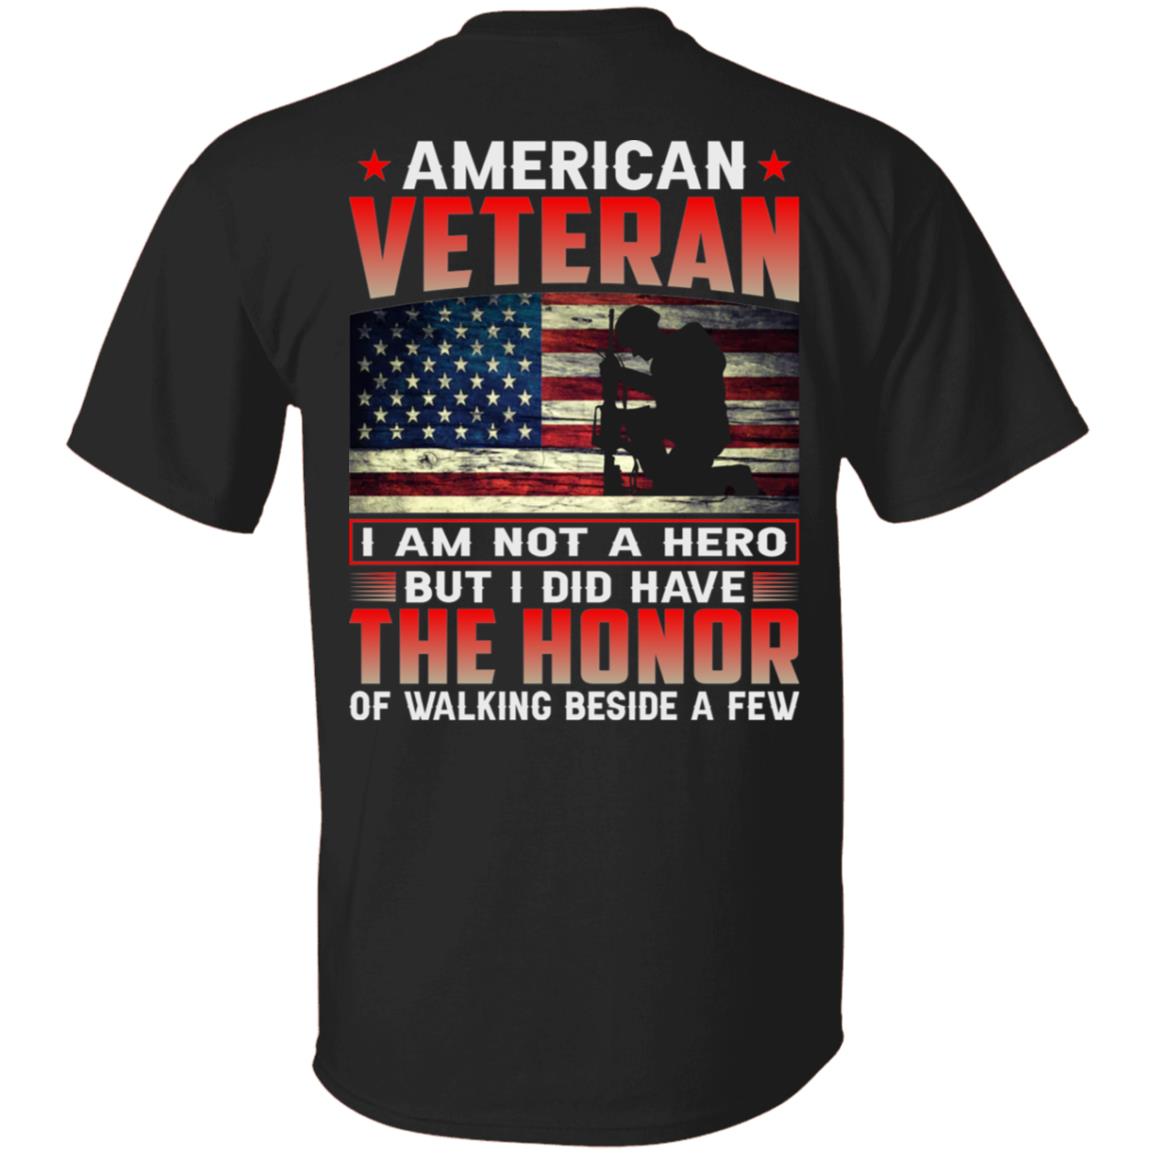 American Veteran I am Not A Hero But I Did Have The Honor of Walking Beside a Few T-shirt